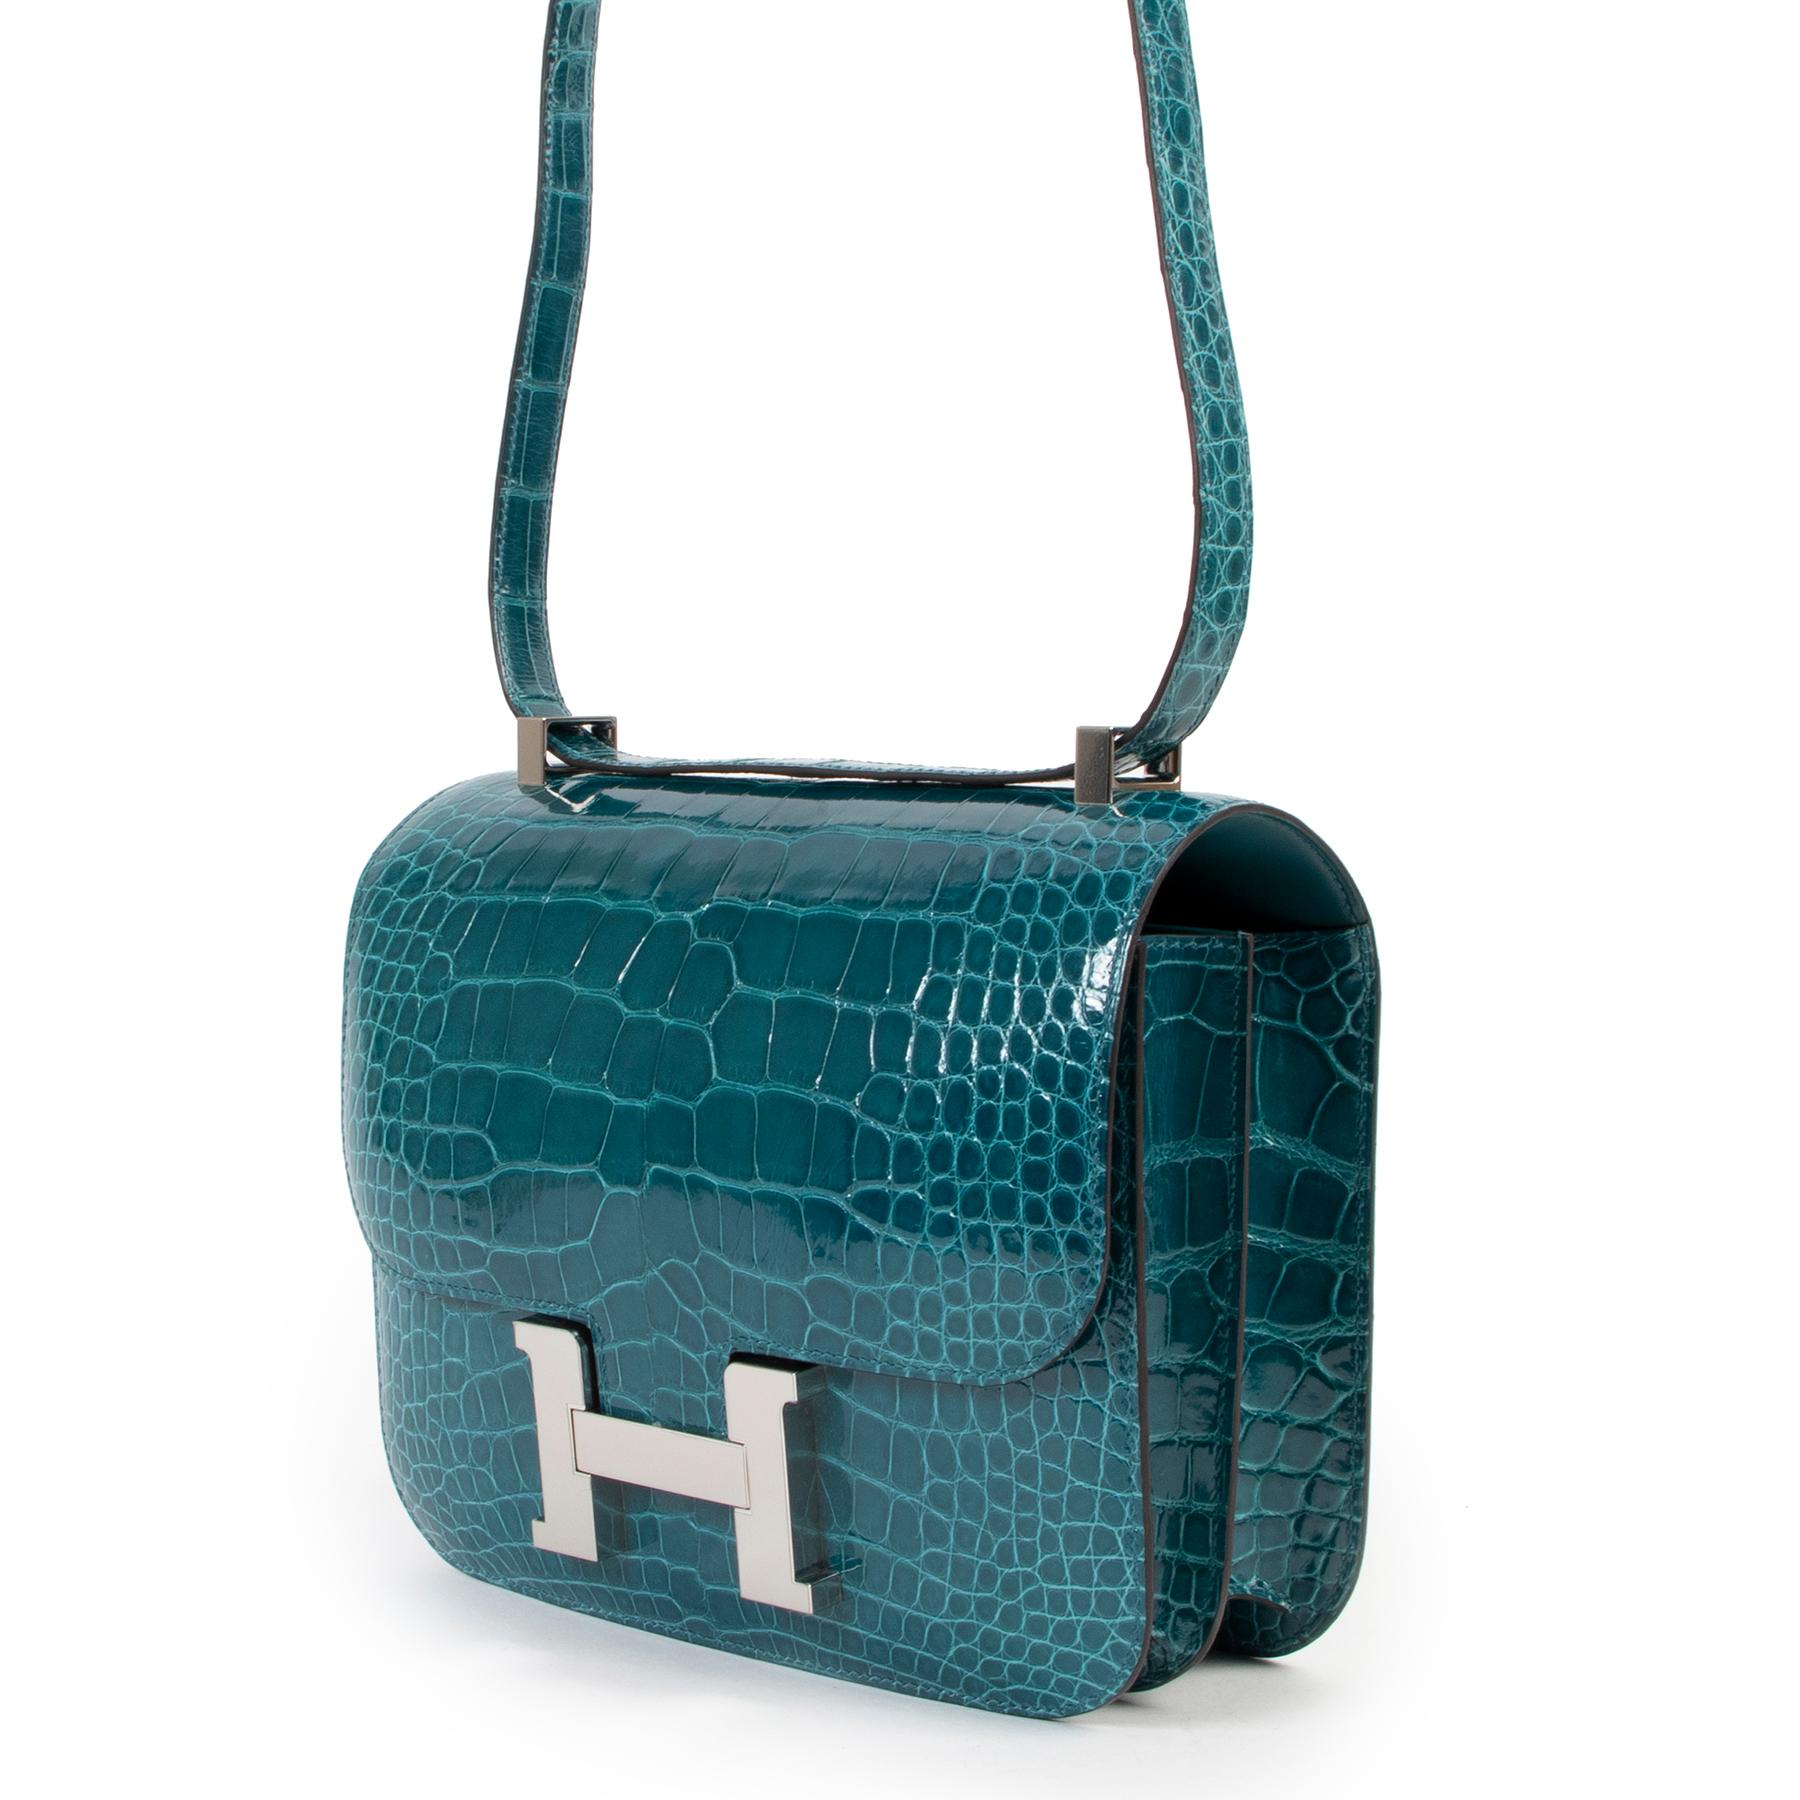 Hermès Constance 24 Vert Bosphore Alligator Lisse PHW

Impossible to find elsewhere! This Hermès Constance 22 in absotulely stunning 